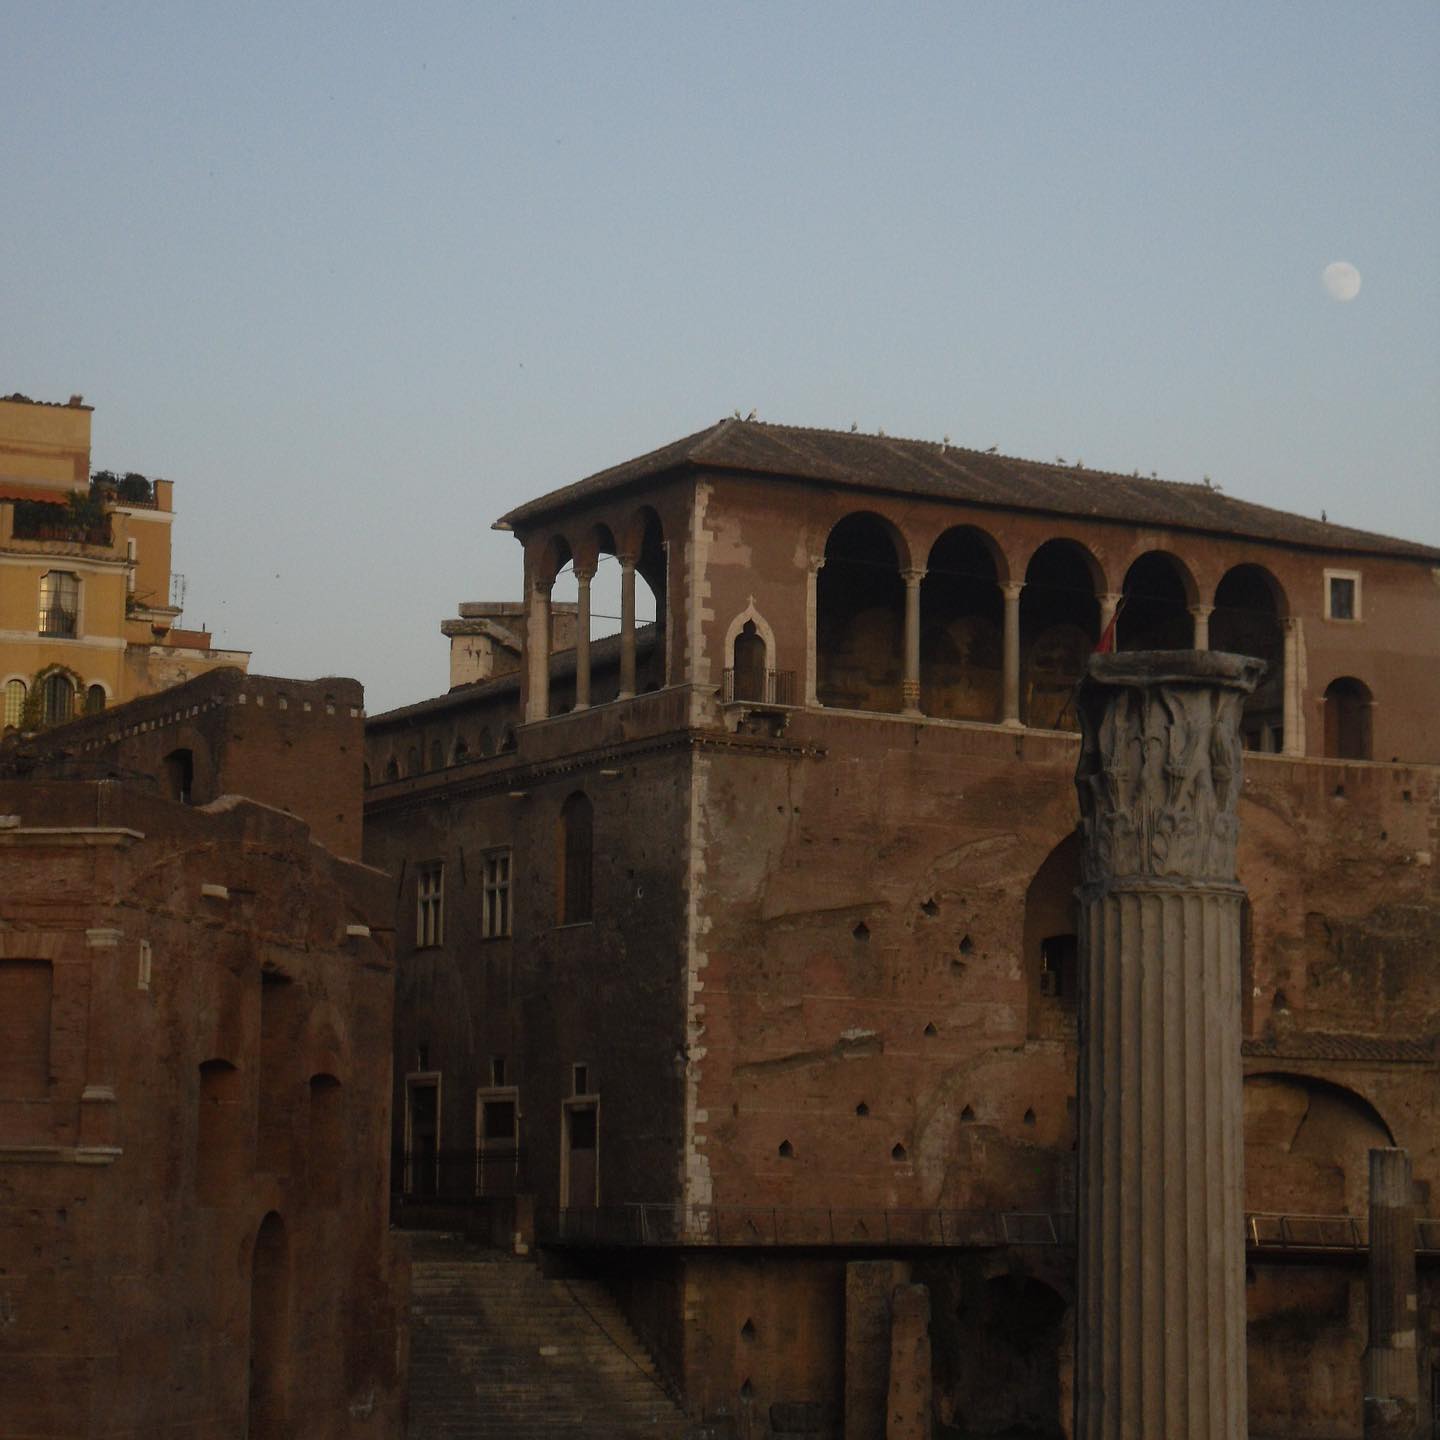 I admire the ancient architecture. For me, it is like to jump in the past and live history. Maybe that's why I love Rome